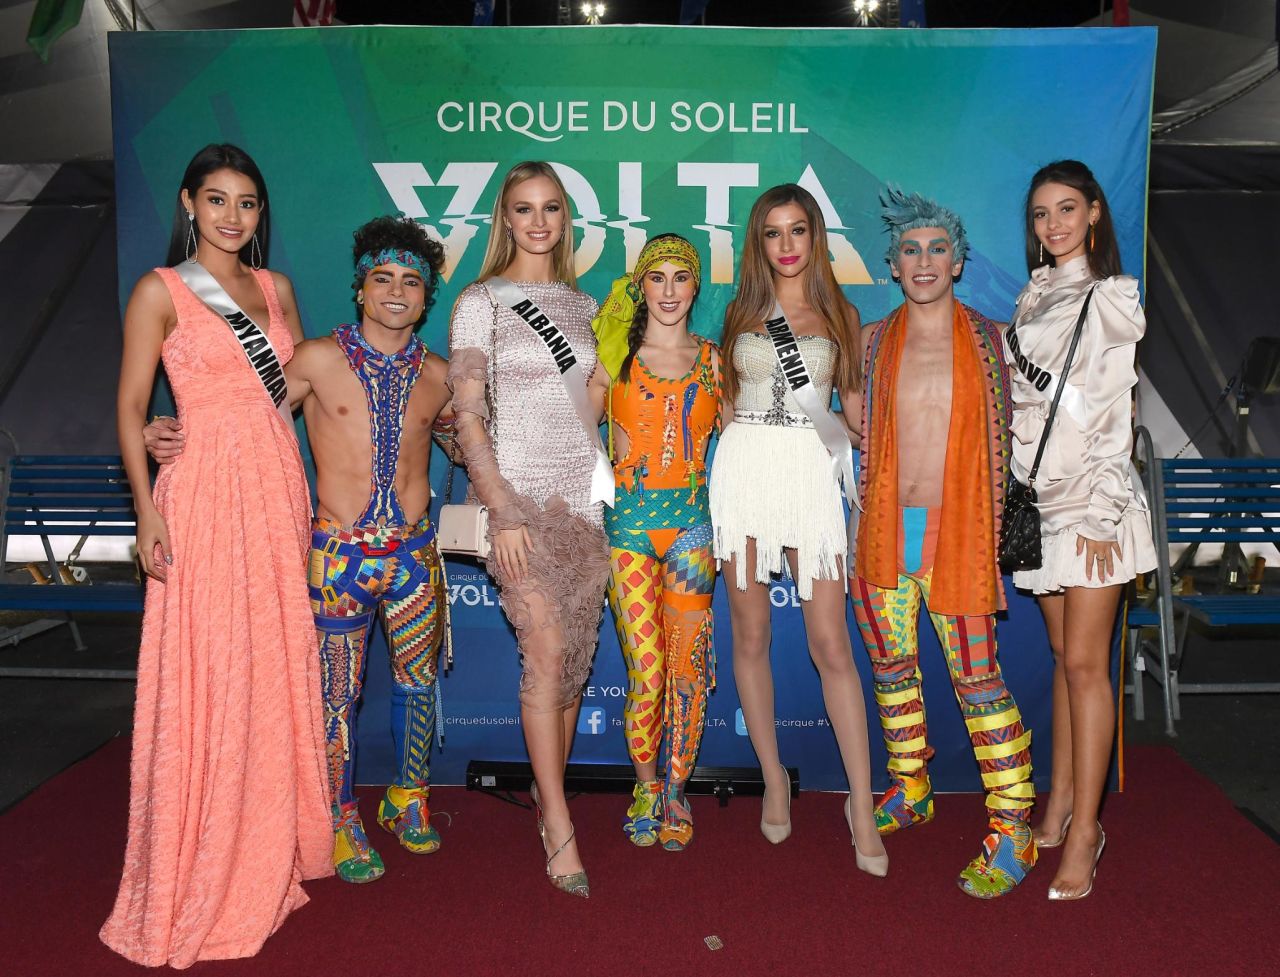 Miss Myanmar Swe Zin Htet, Miss Albania Cindy Marina, Miss Armenia Dayana Davtyan and Miss Kosovo Fatbardha Hoxha pose with cast members of Volta during Volta By Cirque Du Soleil at Atlantic Station on December 04, 2019 in Atlanta, Georgia. 